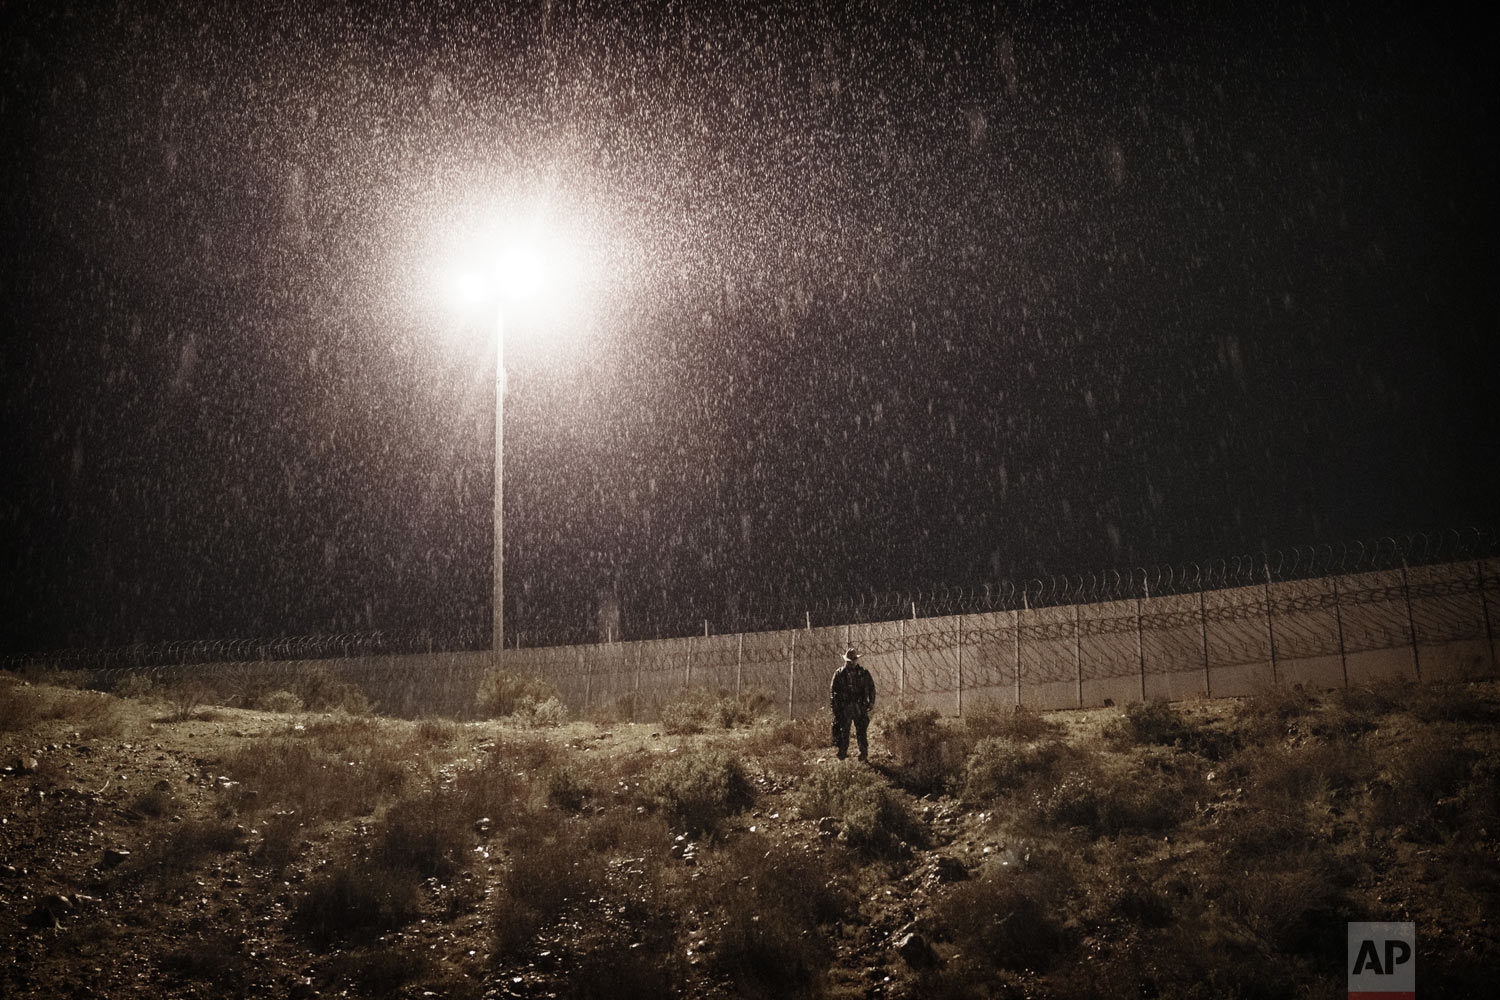  A U.S. Border Protection officer stands under the rain as he watches the border fence between San Diego, Calif., and Tijuana, Mexico, Tuesday, Jan. 1, 2019. Discouraged by the long wait to apply for asylum through official ports of entry, many migra